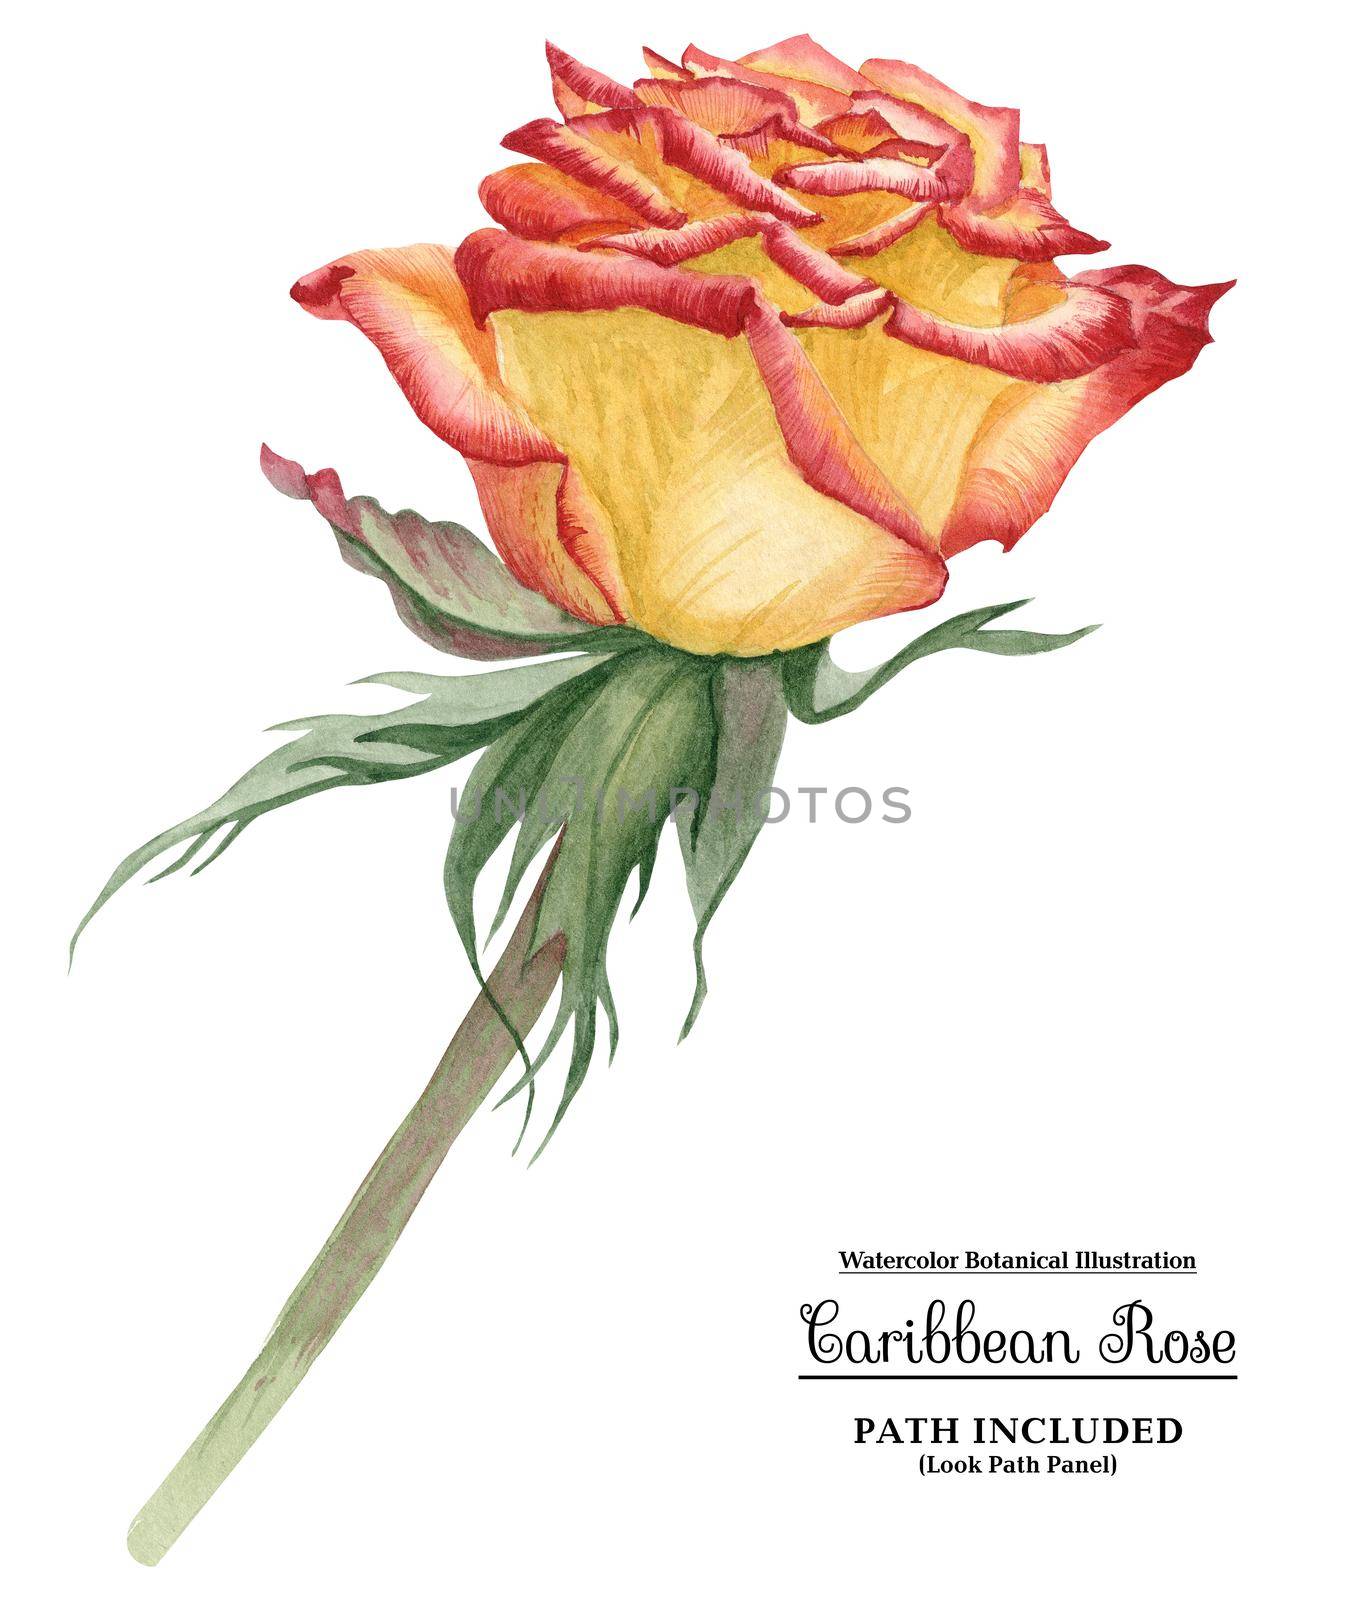 Modern watercolor botanical illustration. Yellow-Red Caribbean Rose by Xeniasnowstorm